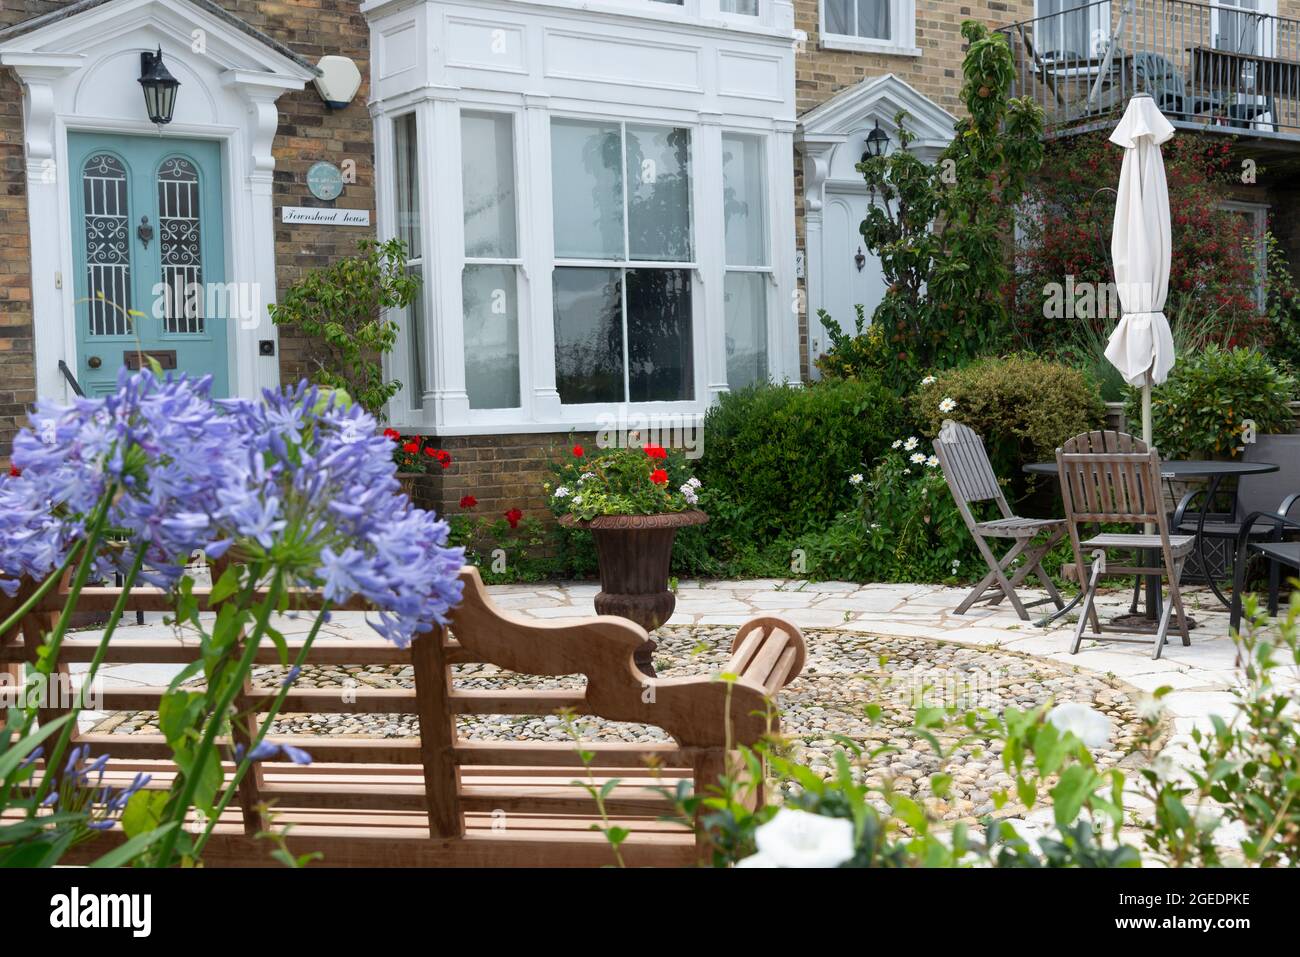 Georgian style house with coastal or seaside garden and agapanthus in flower on the seafront at Cowes, Isle of Wight, England, UK Stock Photo